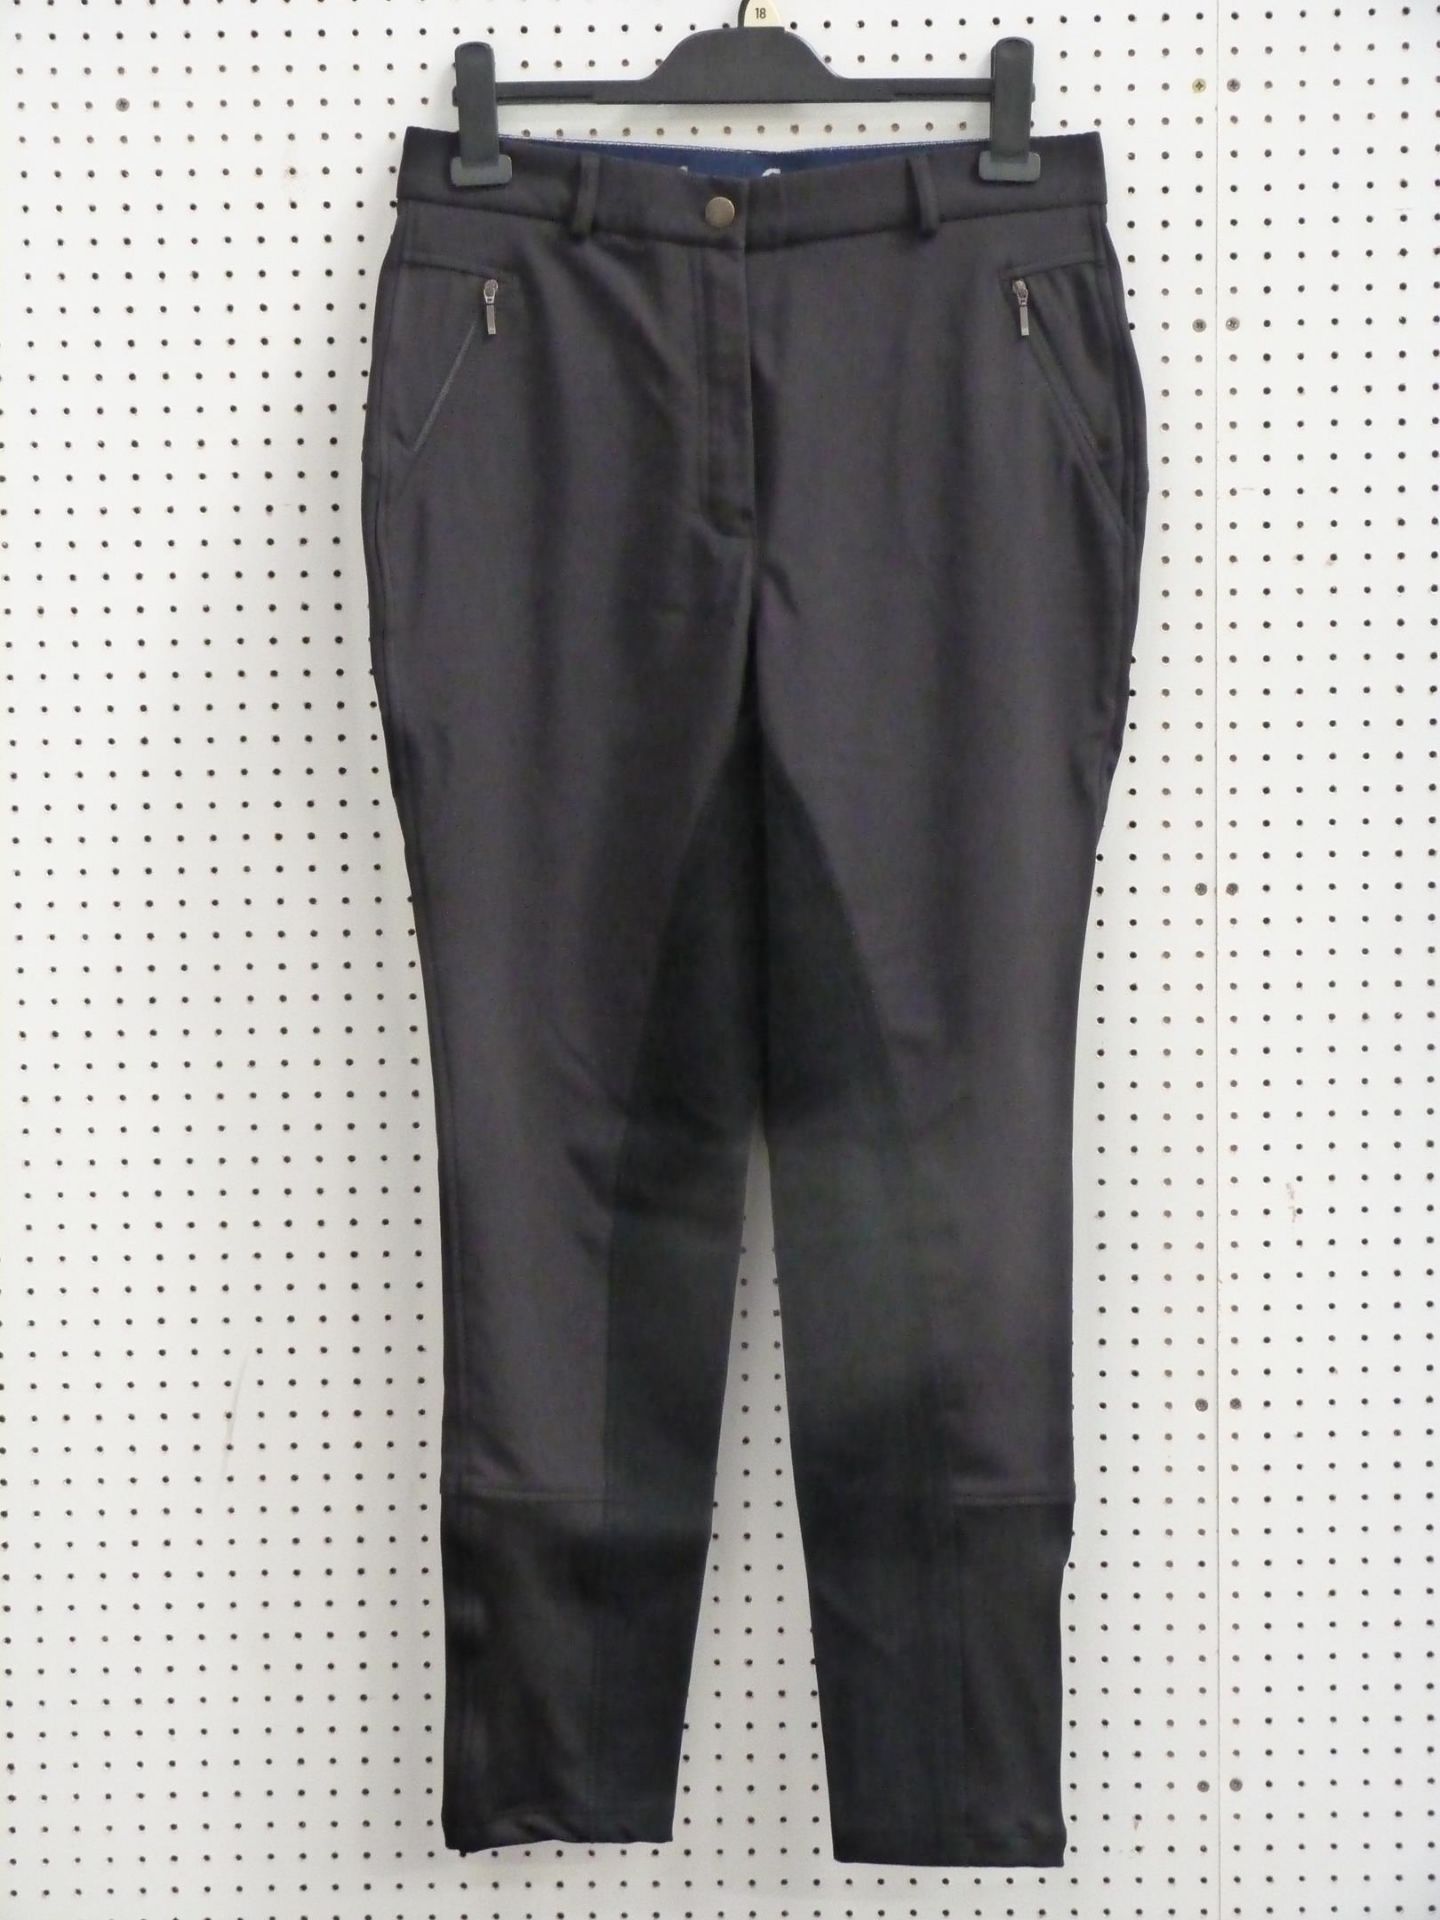 * Two Pairs of New Equatech Winter Breeches in Black. One pair size 24 the other size 30 (2) RRP £